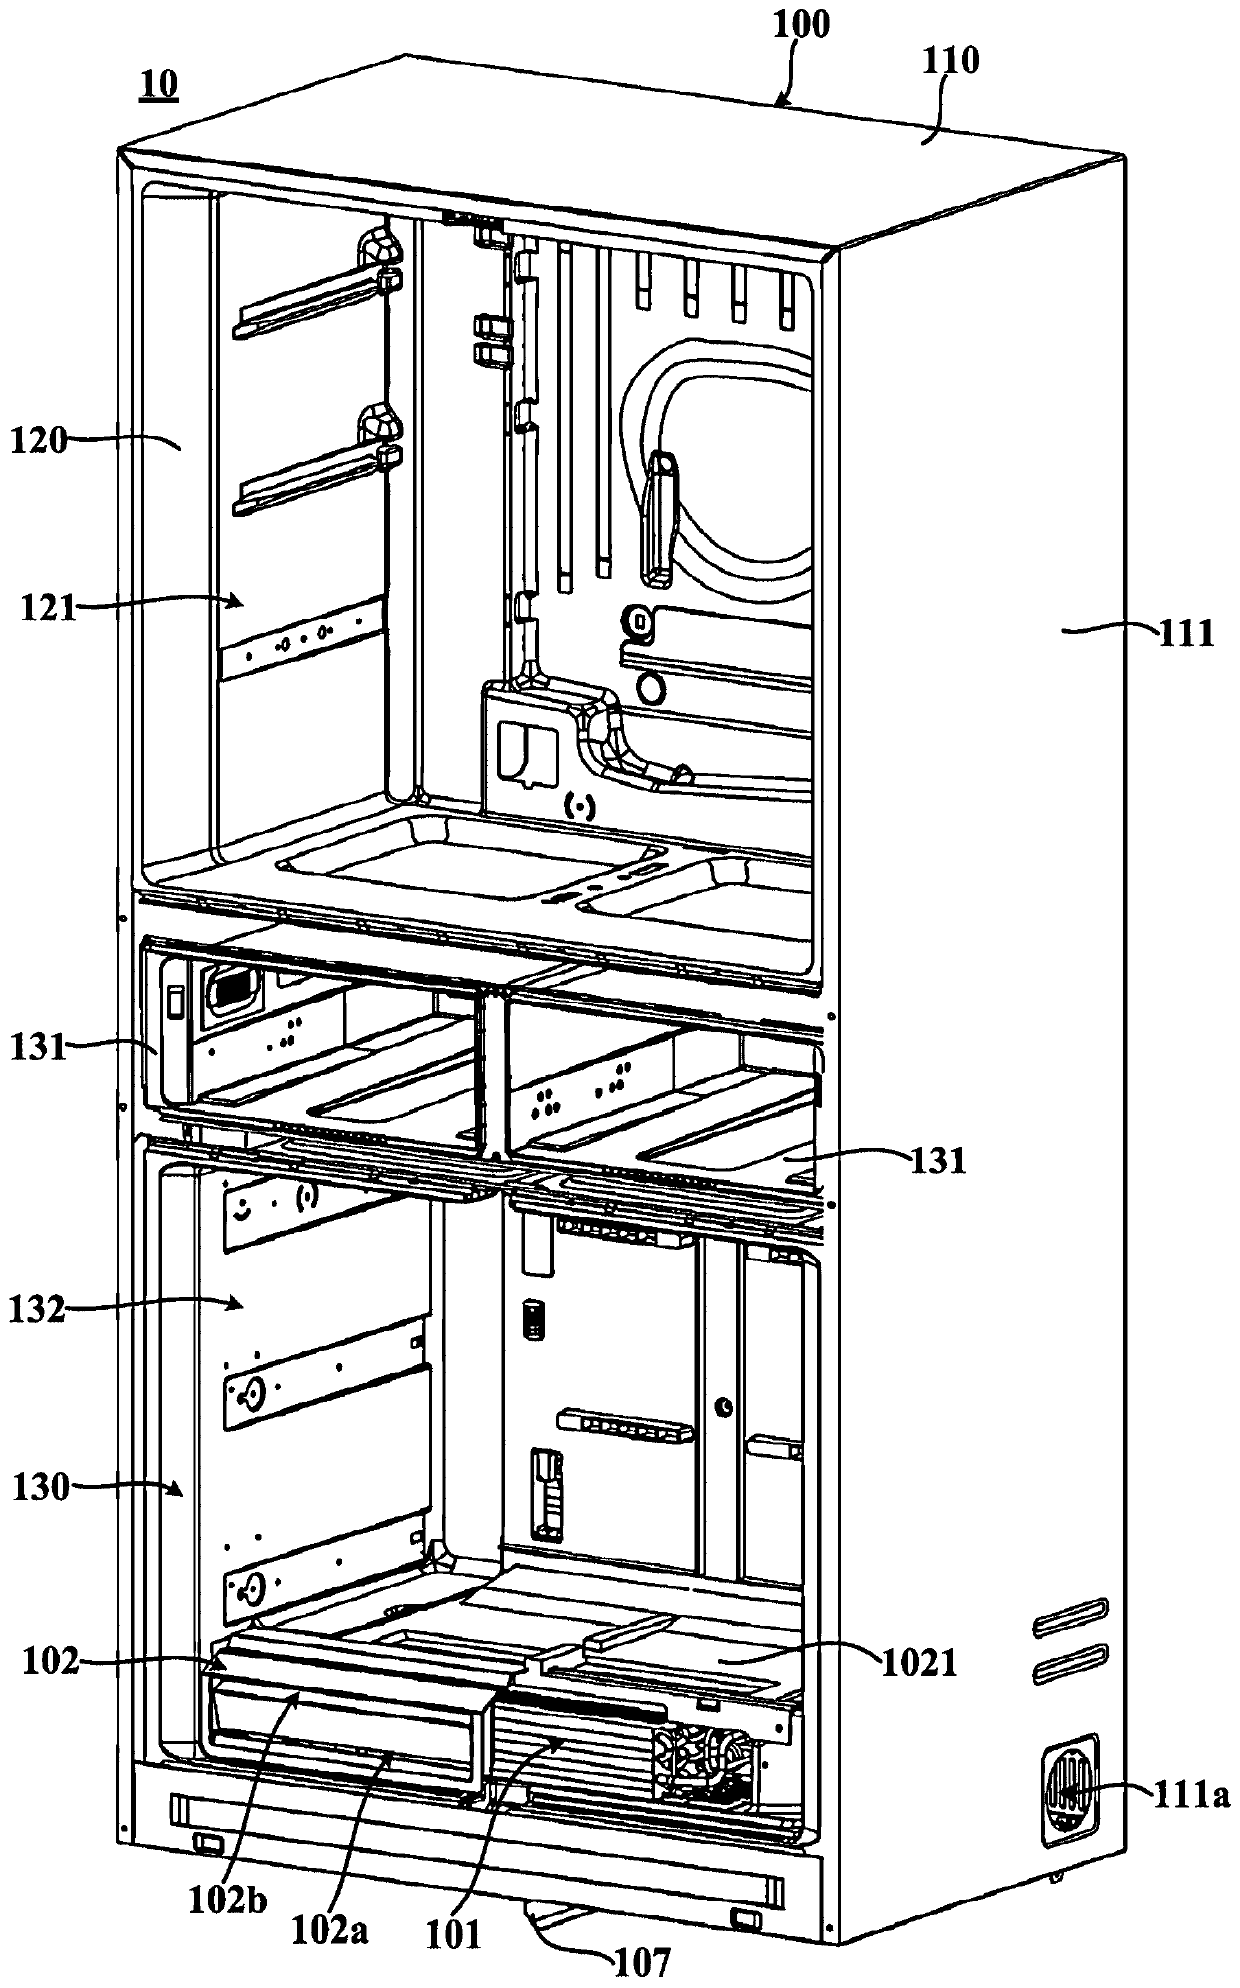 Refrigerator with volute centrifugal fan